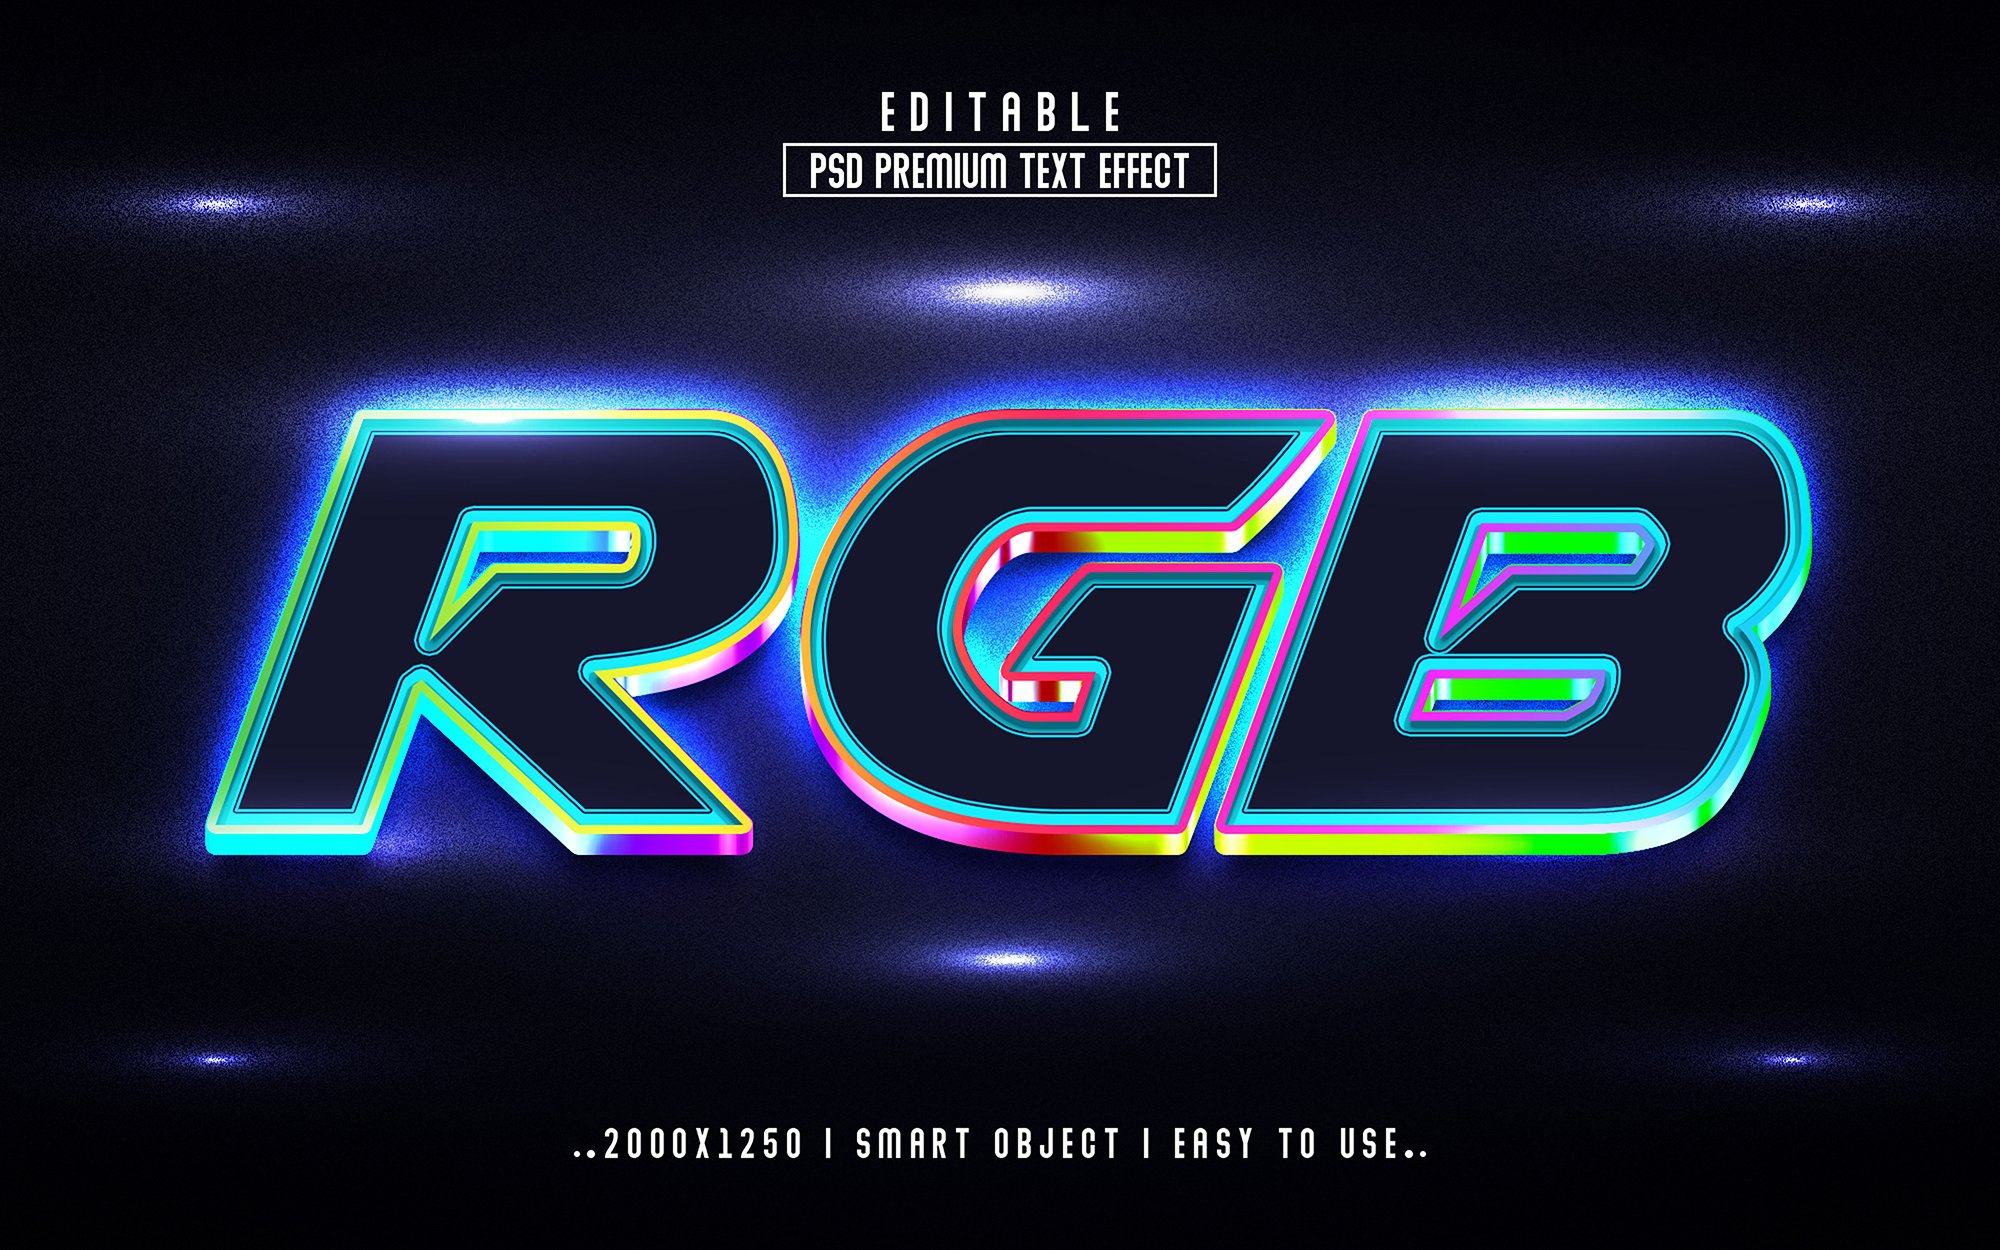 RGB 3D Editable Text Effect stylecover image.